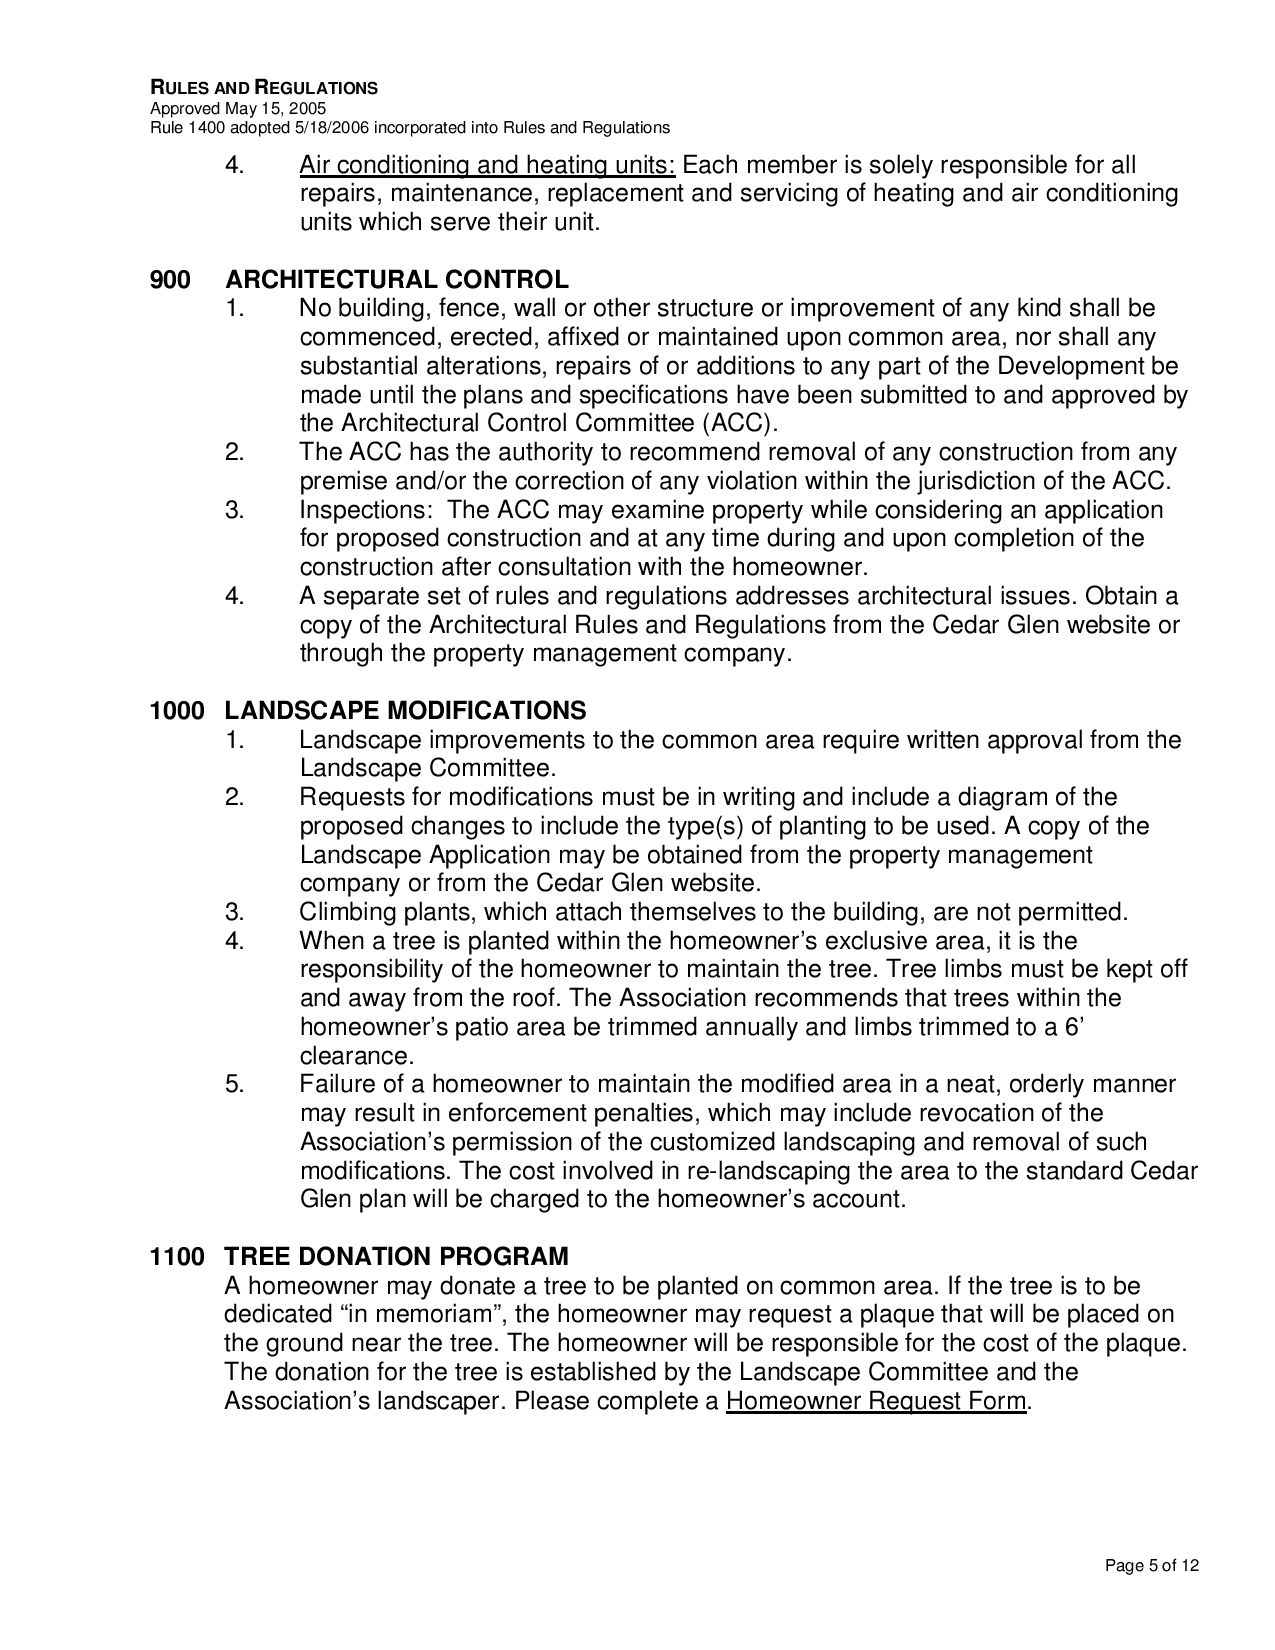 Page 5 of the HOA Rules and Regulations